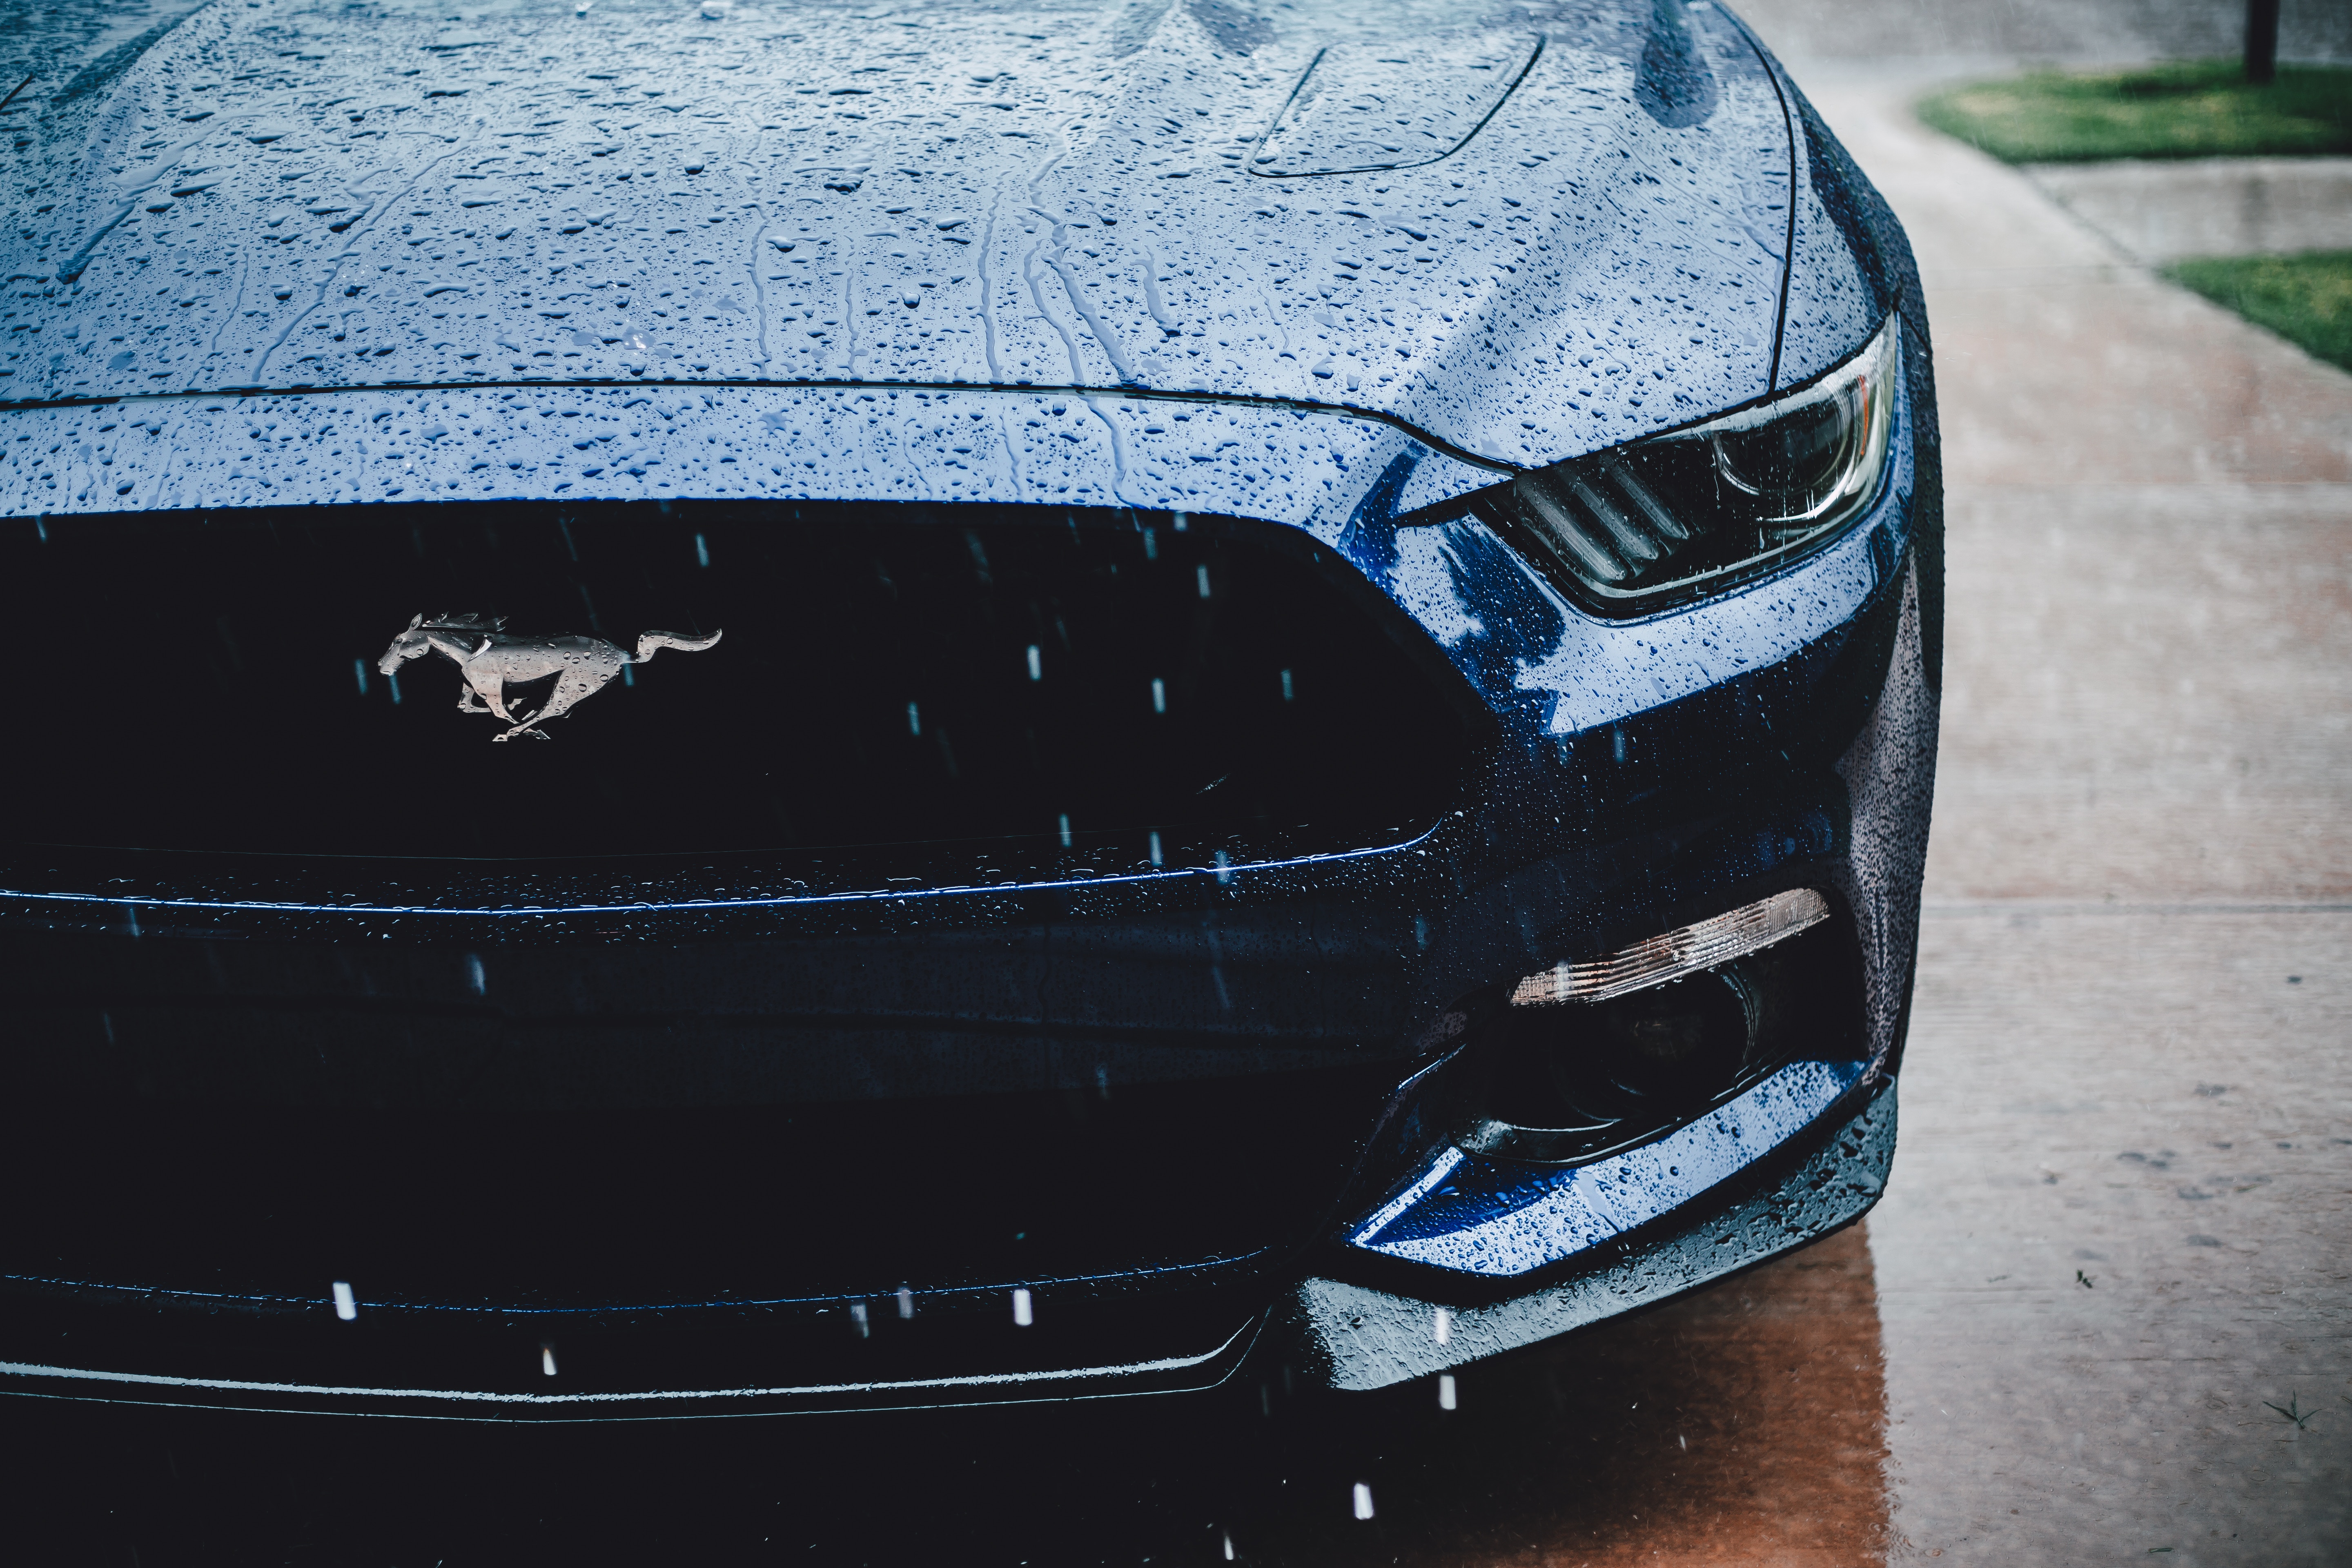 android ford mustang, rain, cars, front view, headlight